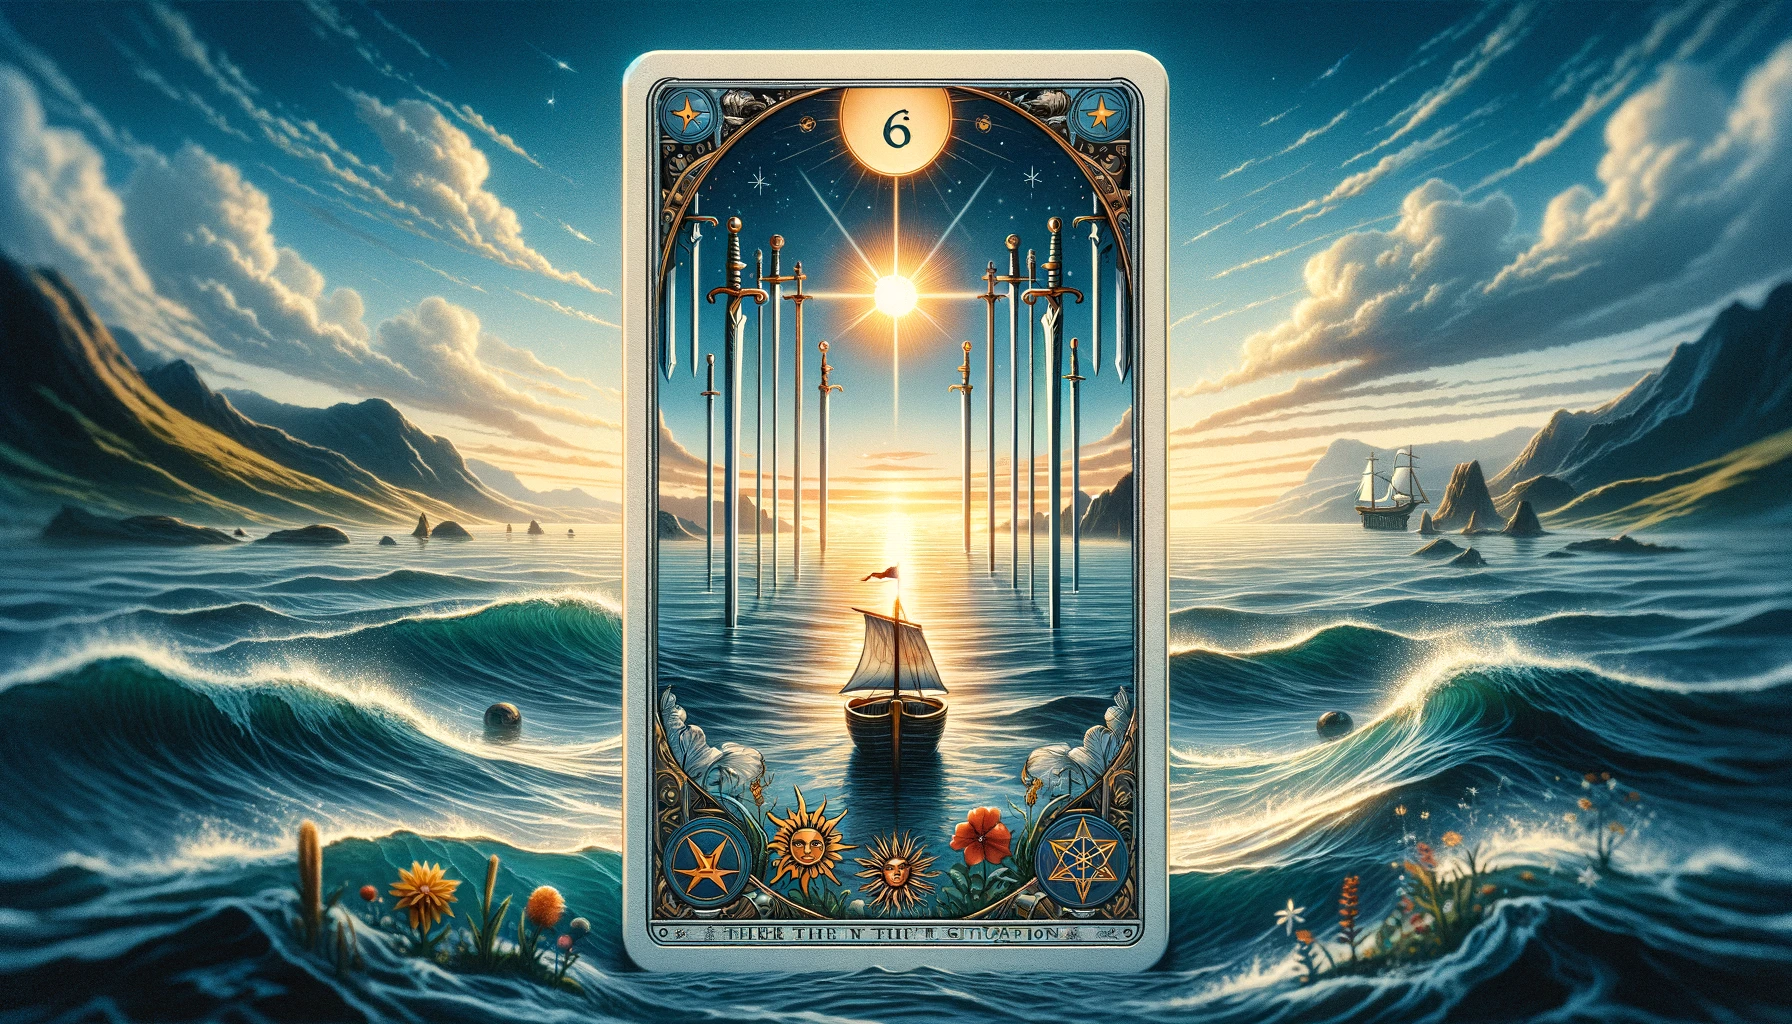 "A serene illustration representing the journey of transition from turbulent to calm waters, symbolizing the process of navigating through difficulties towards stability and peace. The scene evokes a sense of progress, resilience, and the pursuit of clarity and inner peace after overcoming challenges."